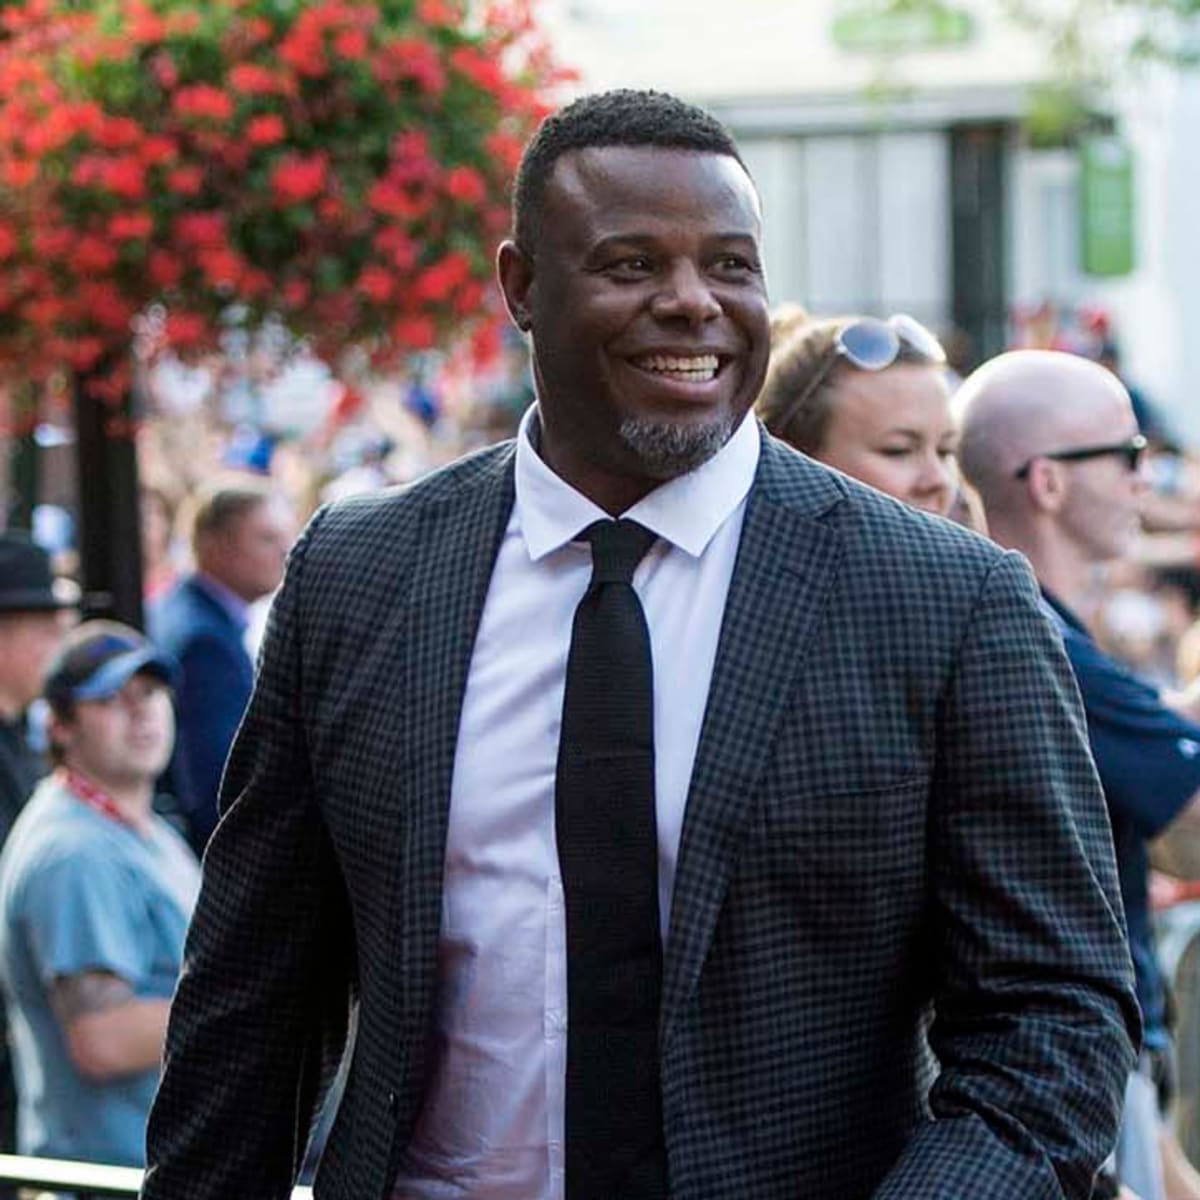 Ken Griffey Jr. went from rising star to face of Major League